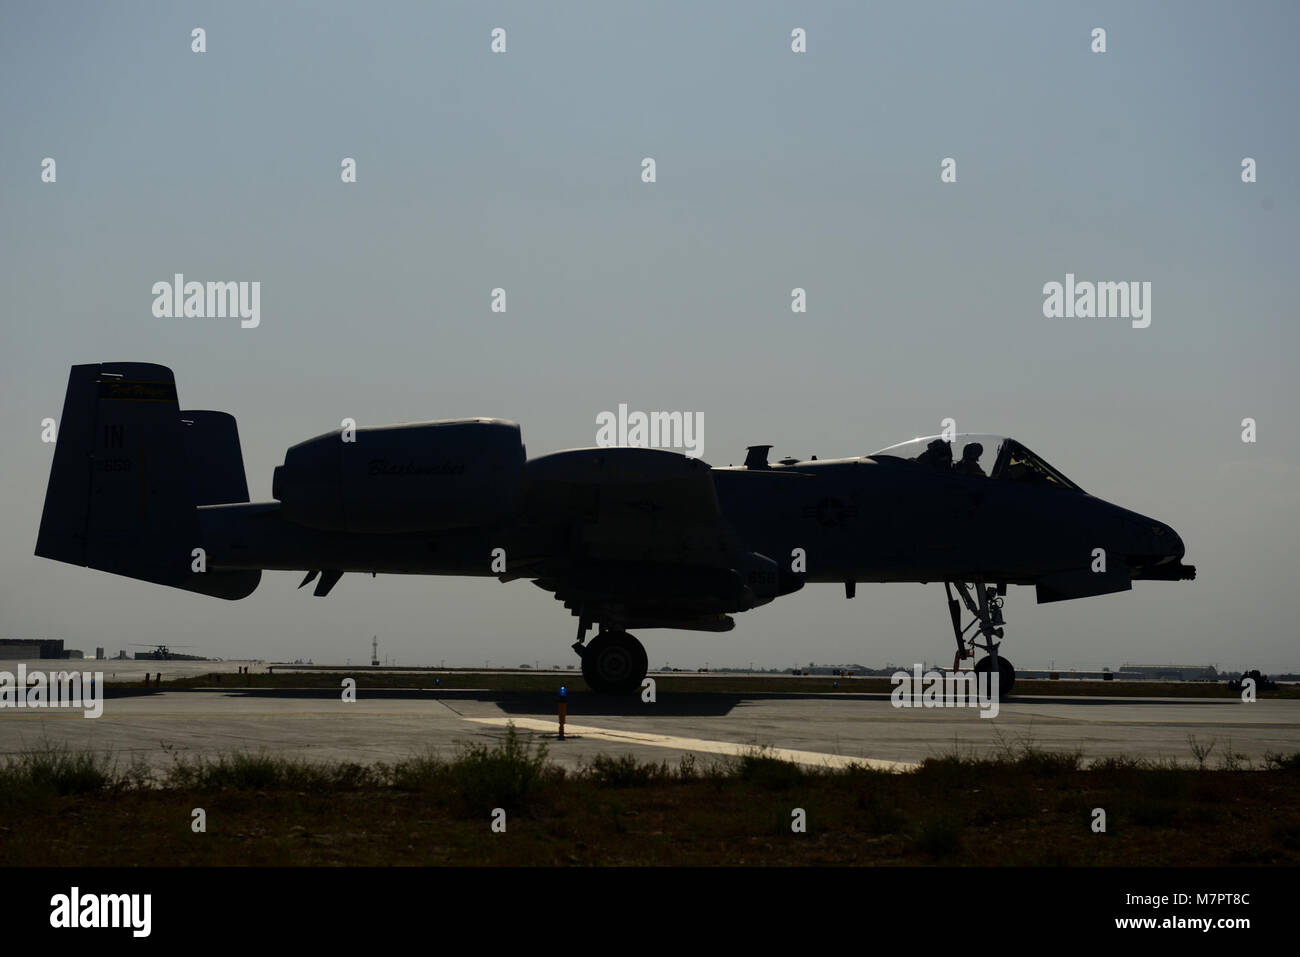 A U.S. Air Force A-10 Thunderbolt prepares for take off at Bagram Airfield, Afghanistan Oct. 24, 2014.  Deployed service members help operate 46 different types of aircraft in-and-out of the buisiest single runway airfield in the Department of Defense. (U.S. Air Force photo by Staff Sgt. Evelyn Chavez/Released) 455th Air Expeditionary Wing Bagram Airfield, Afghanistan Stock Photo